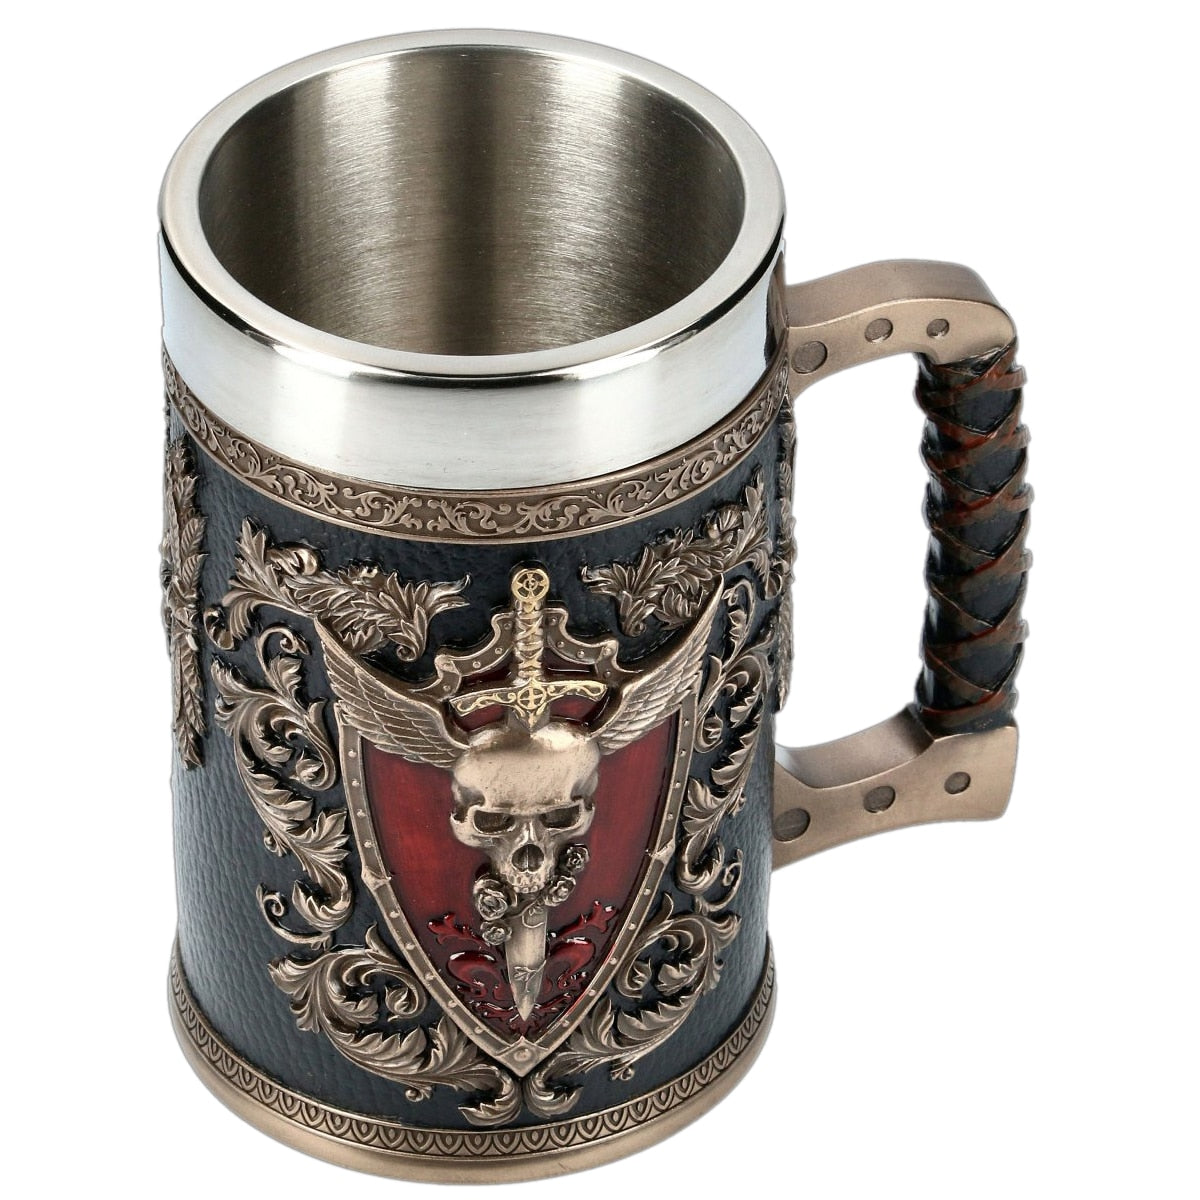 Mystical medieval tankard for beer lovers